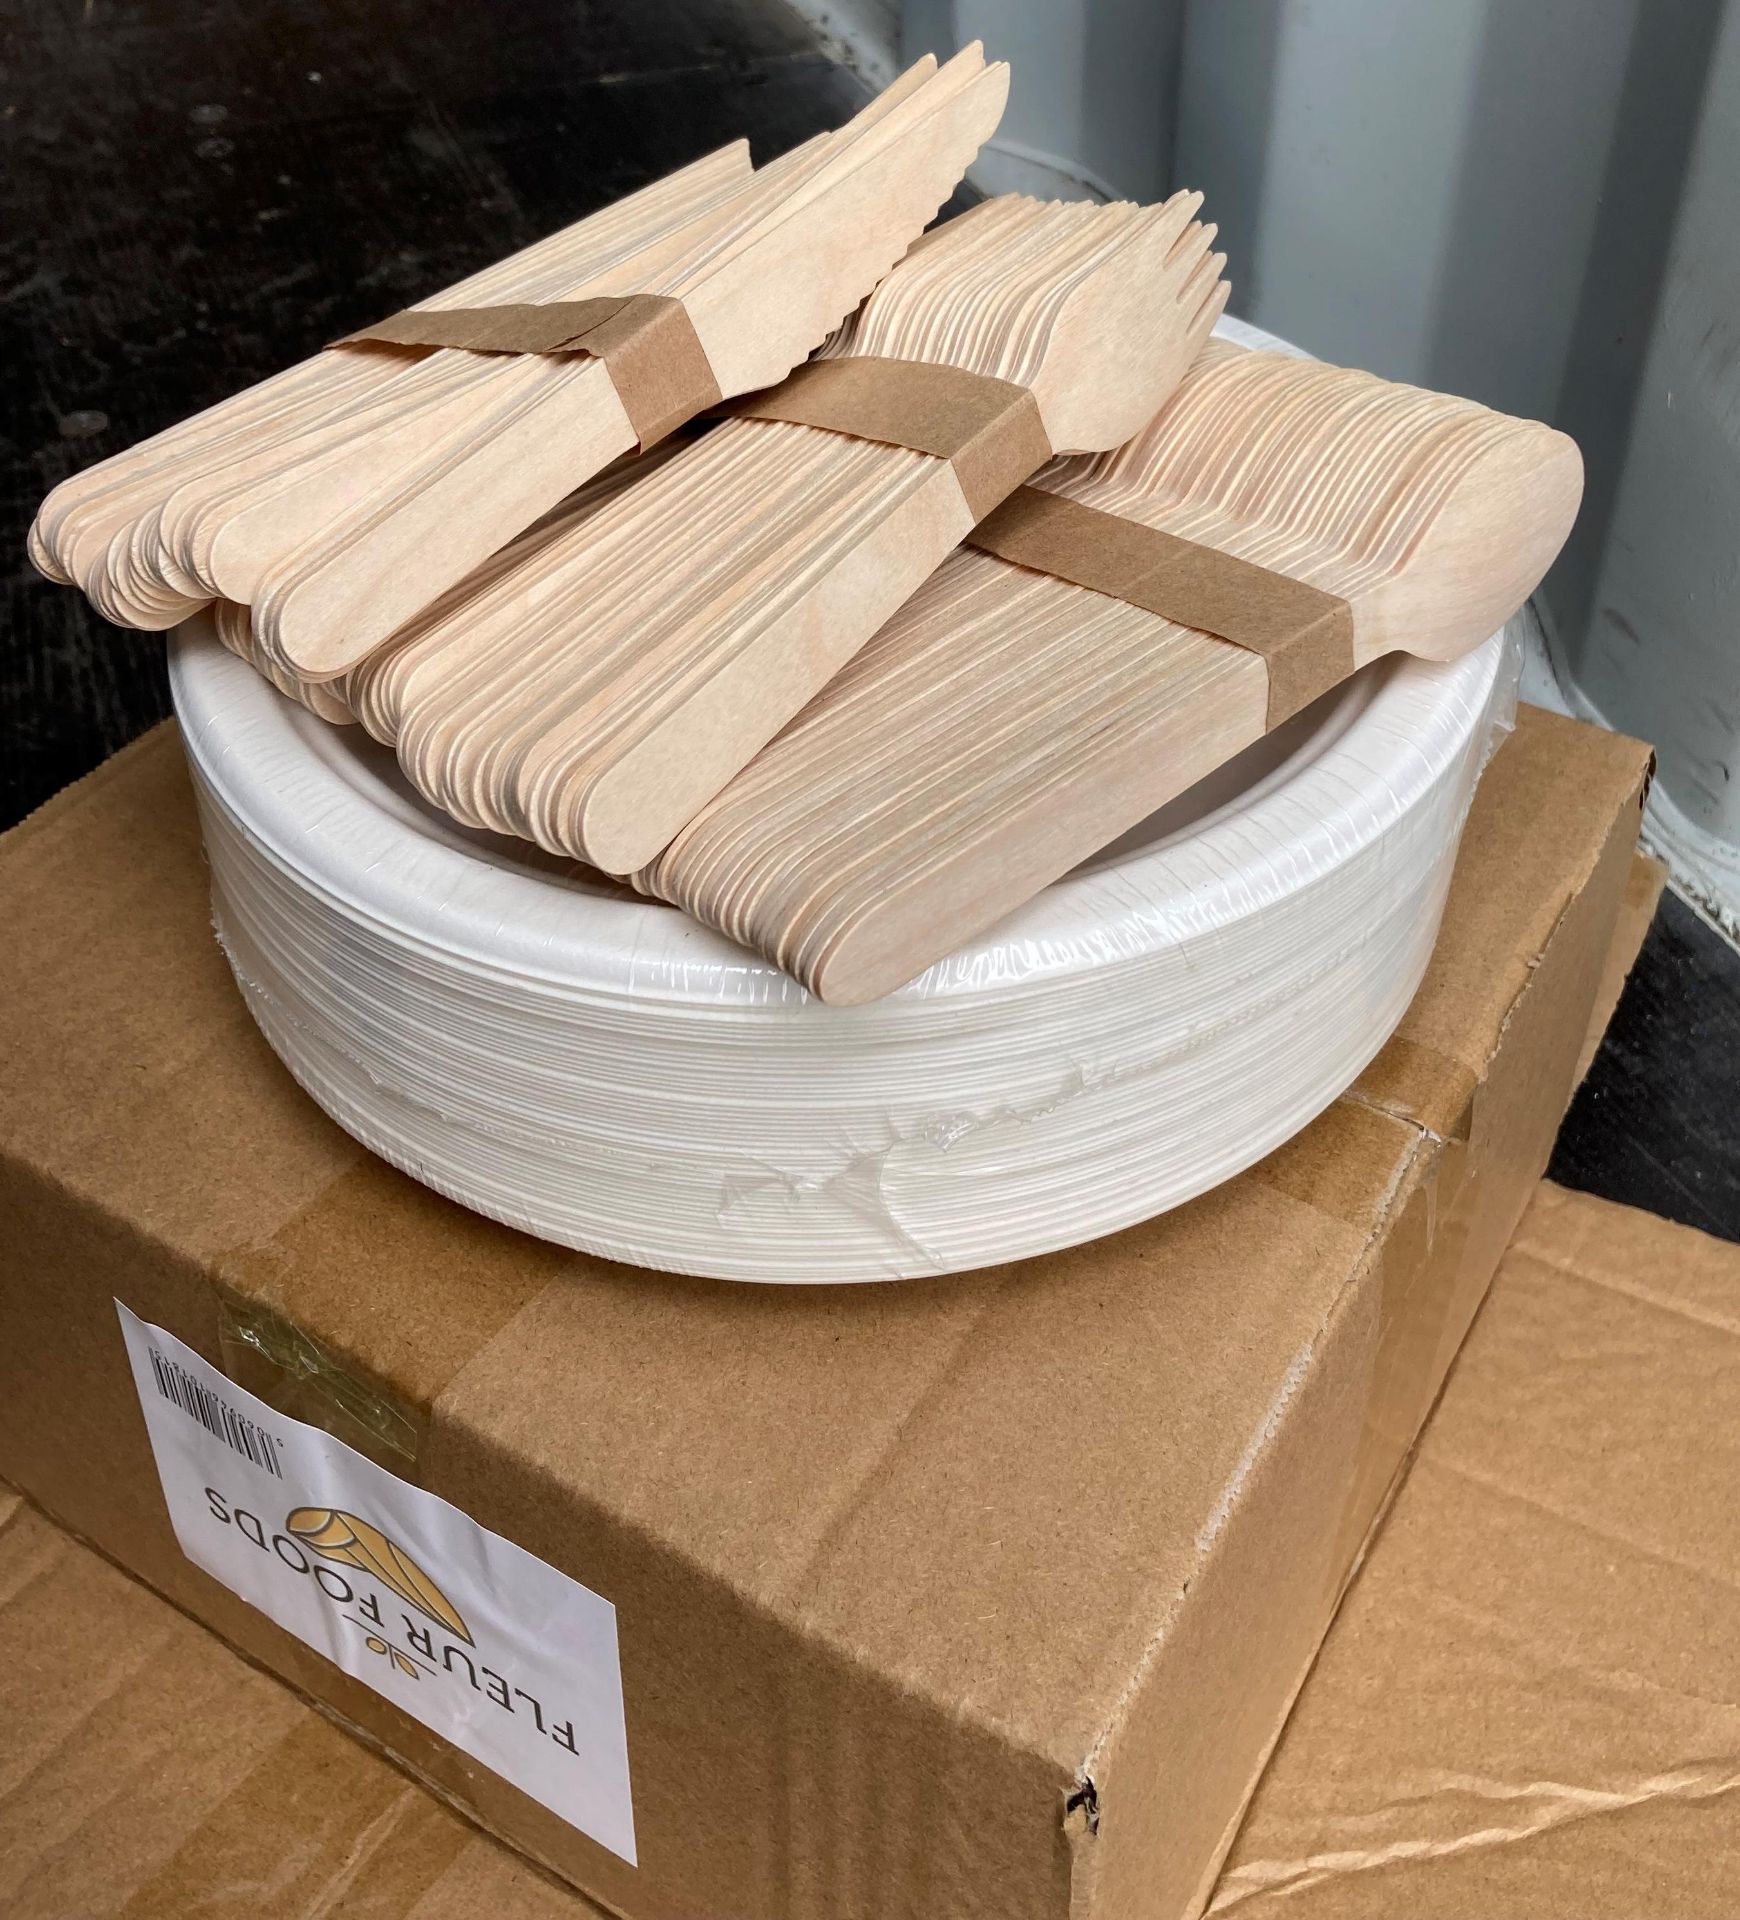 60 x packs and contents of approximately 60 x paper plates, sets of wooden knives, - Image 2 of 5